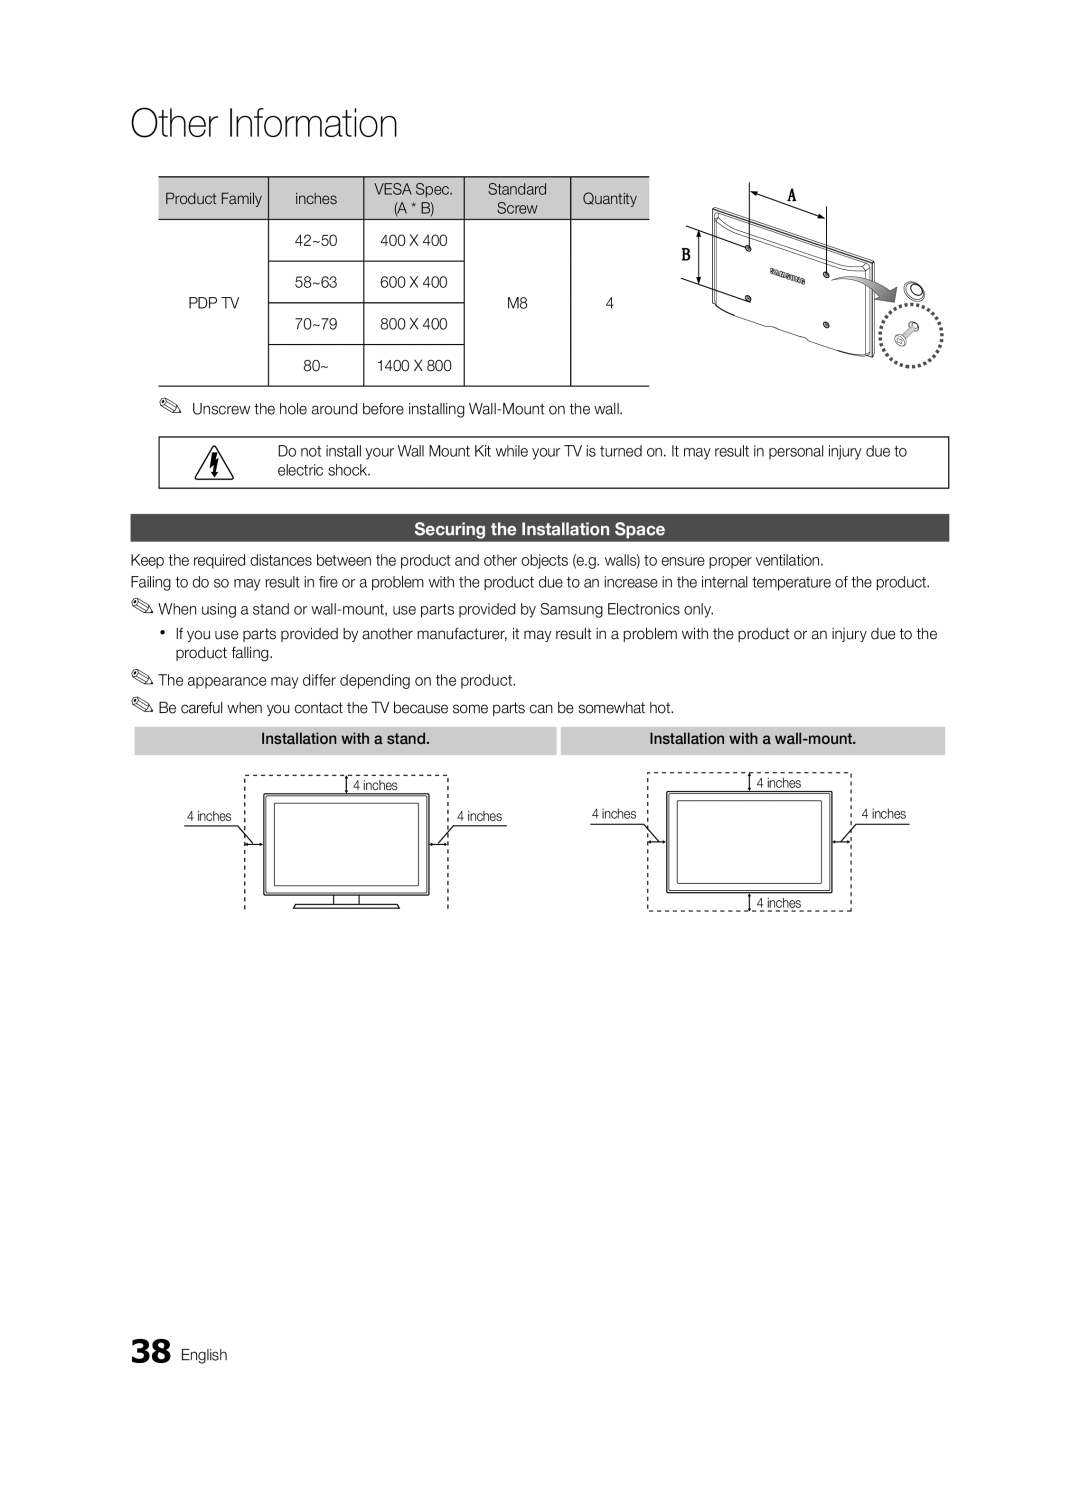 Samsung BN68-03114A-01, PC490-ZA user manual Securing the Installation Space, Other Information 